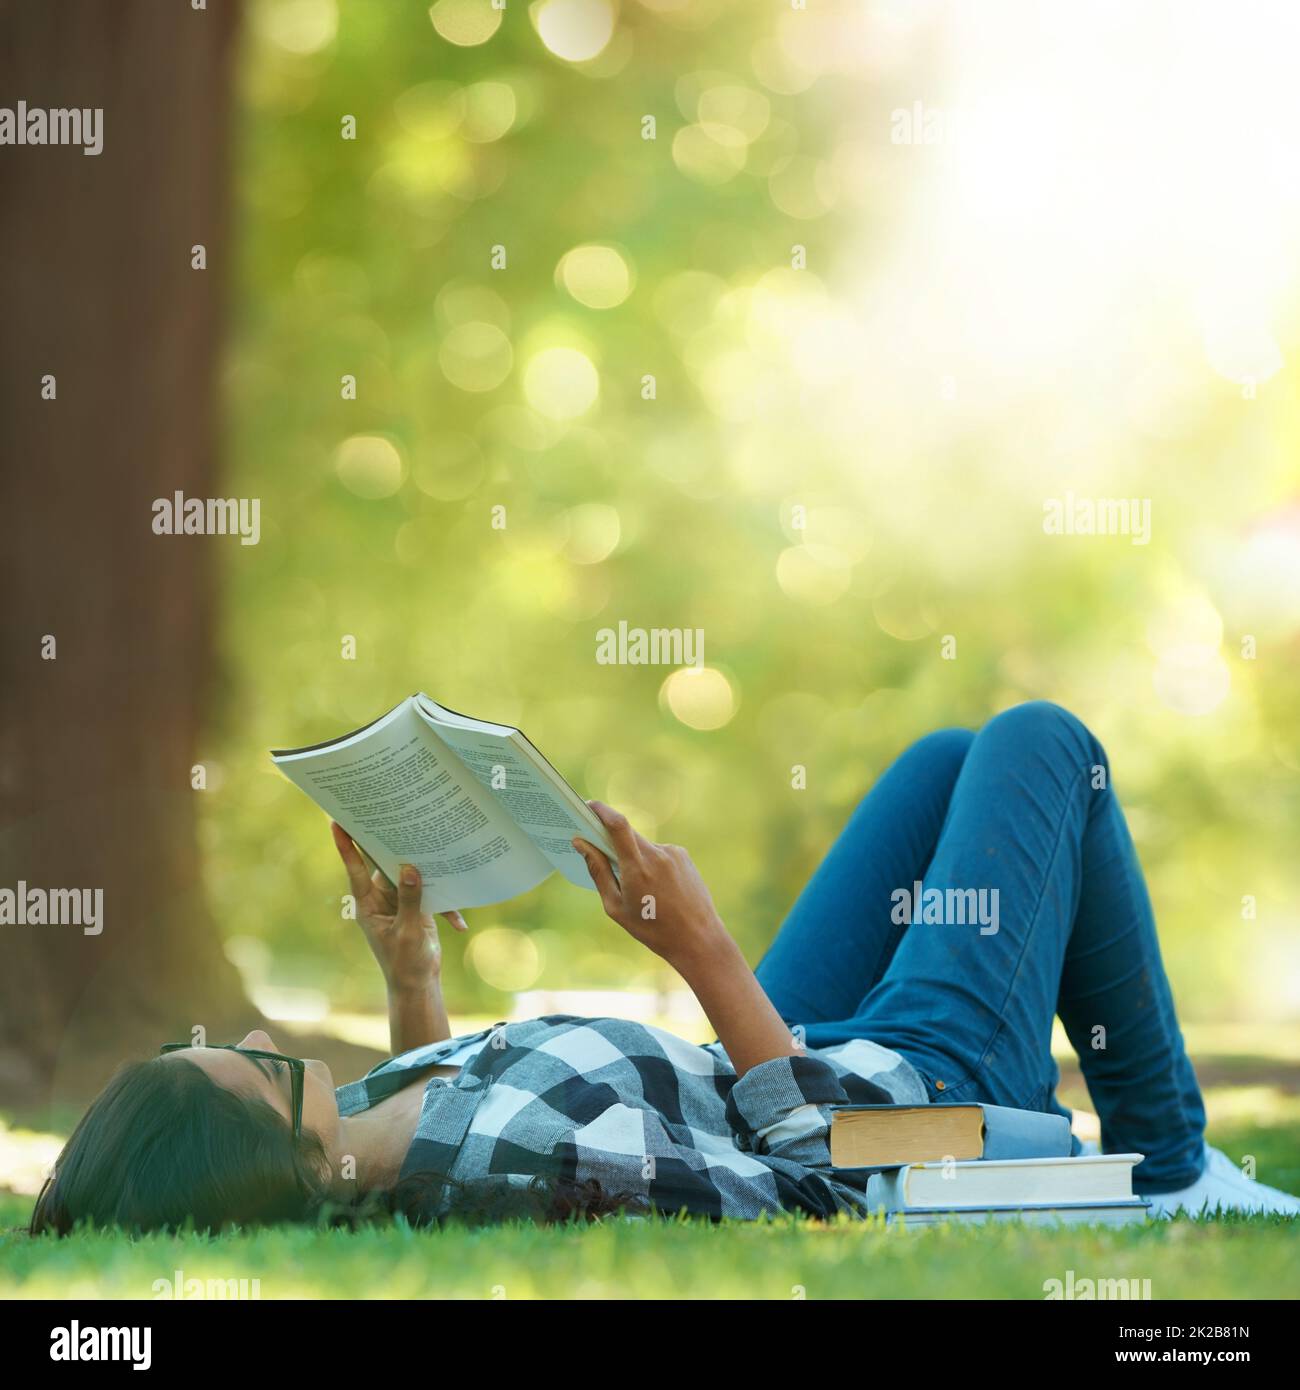 Lazy summer days. Shot of a young woman lying on grass and reading a book. Stock Photo